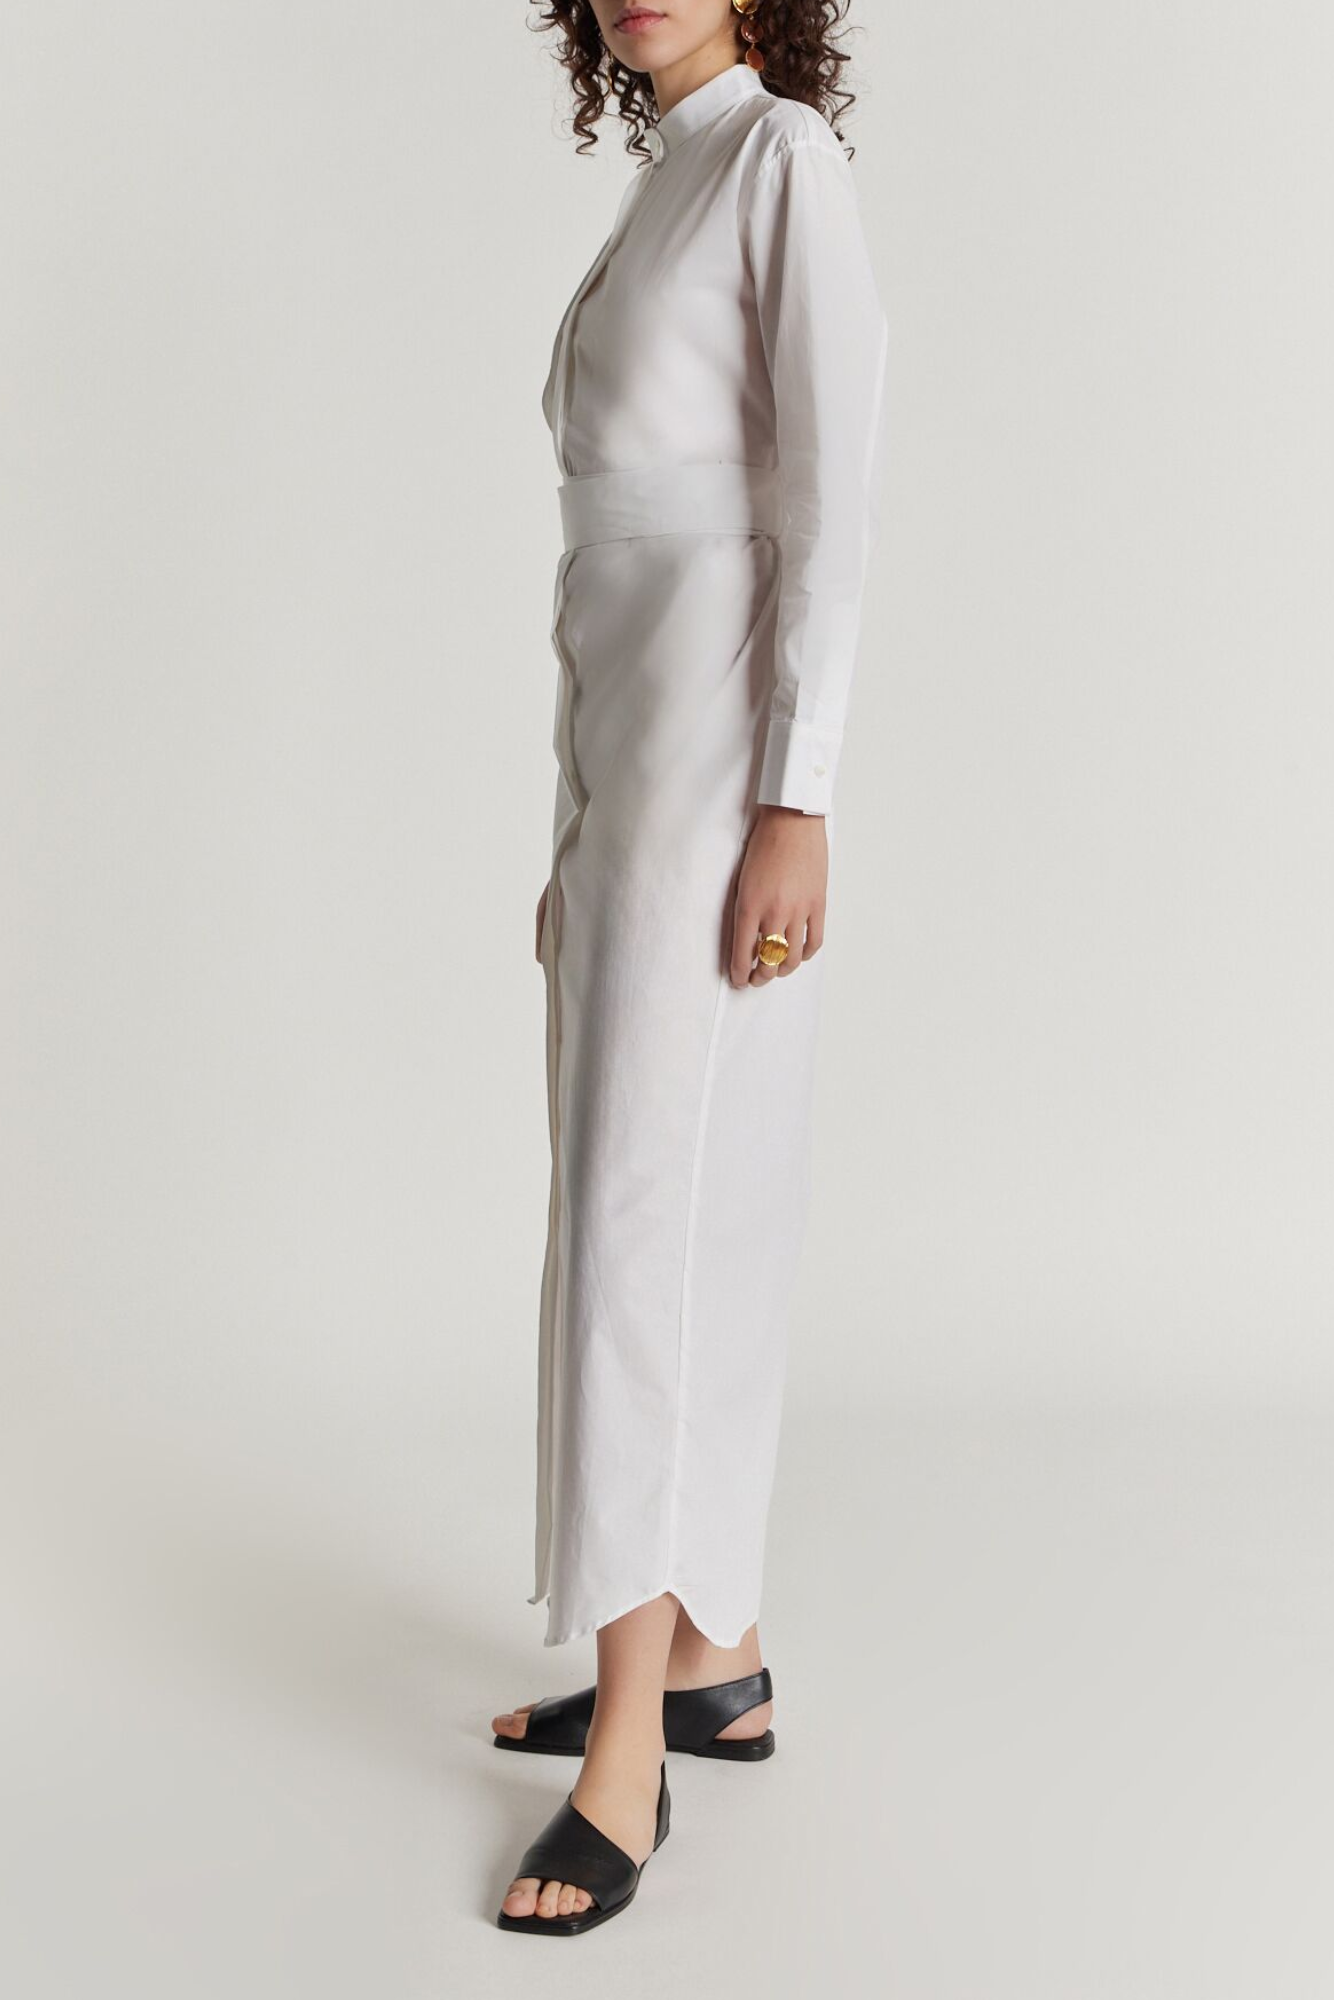 WHITE Popelin Maxi Dress with Sleeve & Button detail